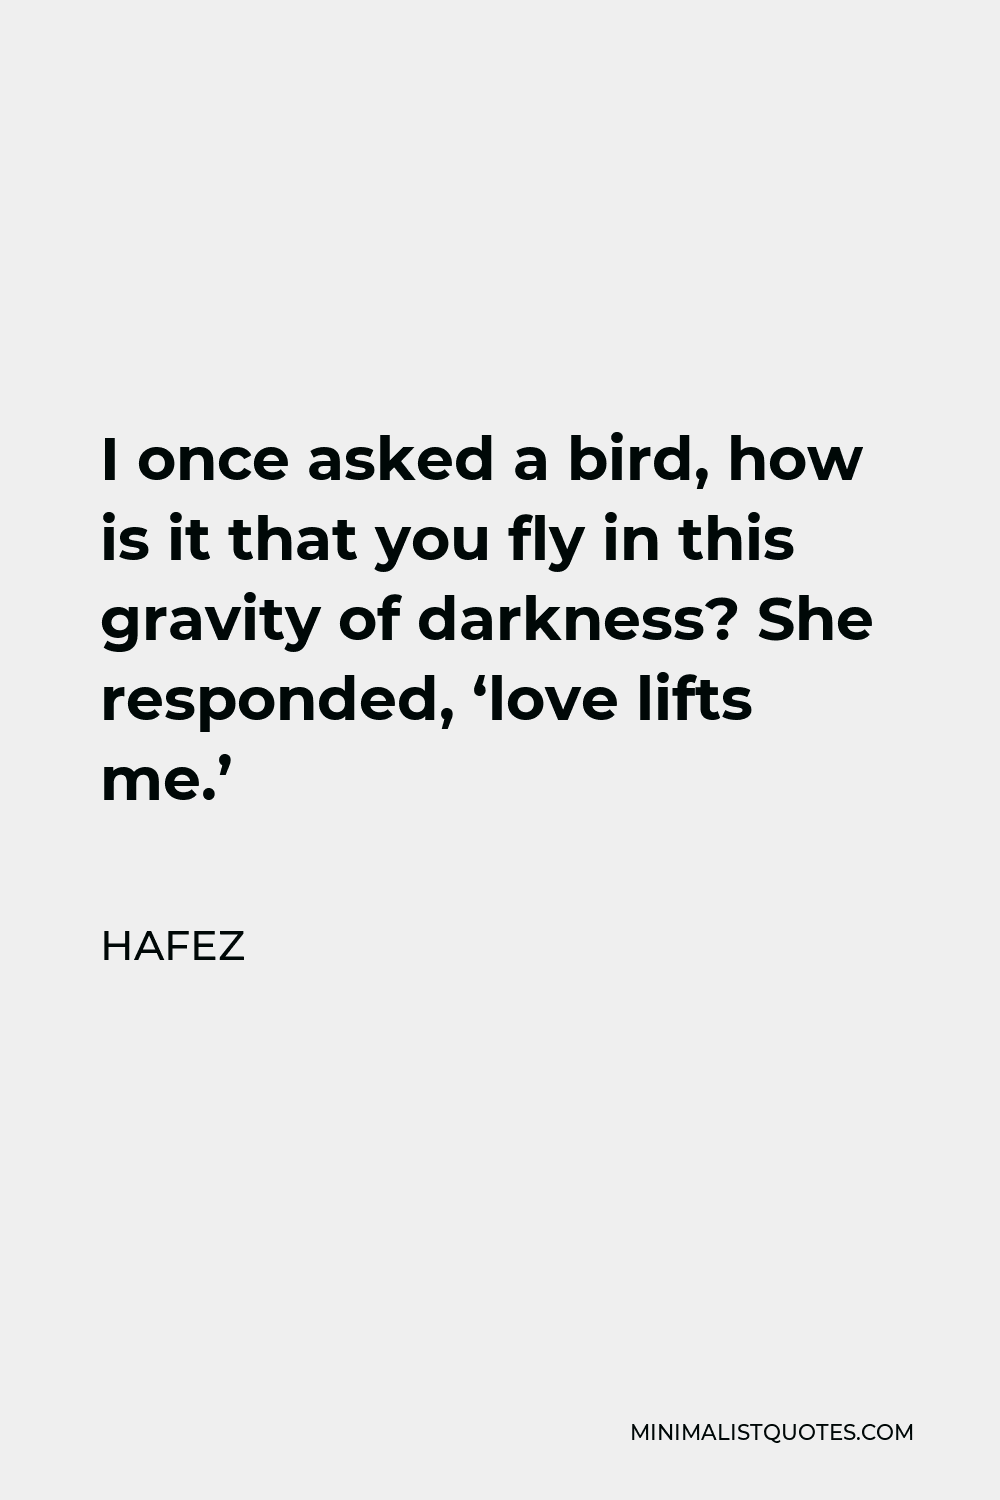 Hafez Quote - I once asked a bird, how is it that you fly in this gravity of darkness? She responded, ‘love lifts me.’